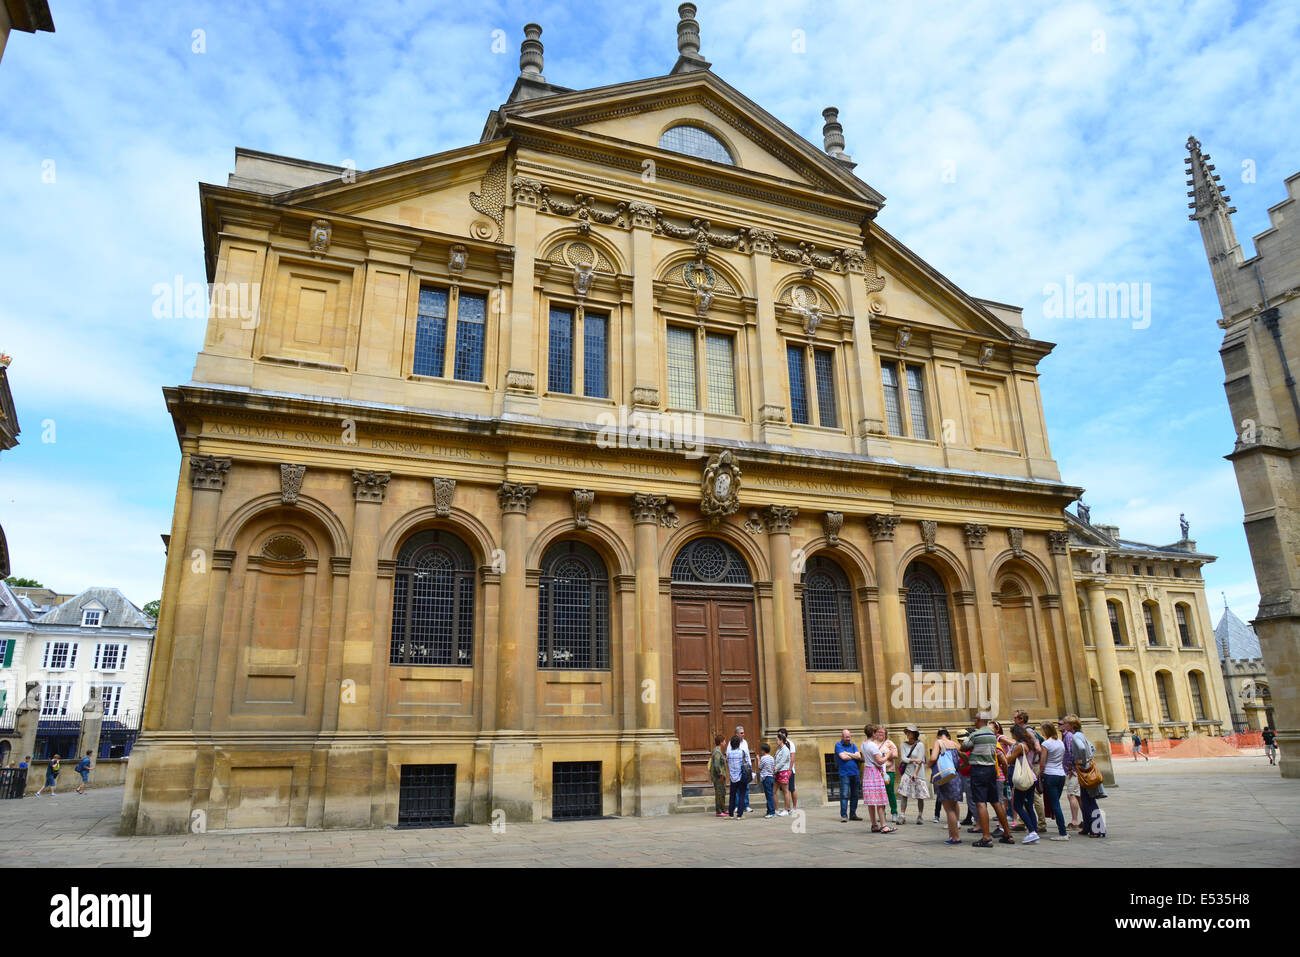 Sheldonian Theatre, Broad Street, Oxford, Oxfordshire, Angleterre, Royaume-Uni Banque D'Images